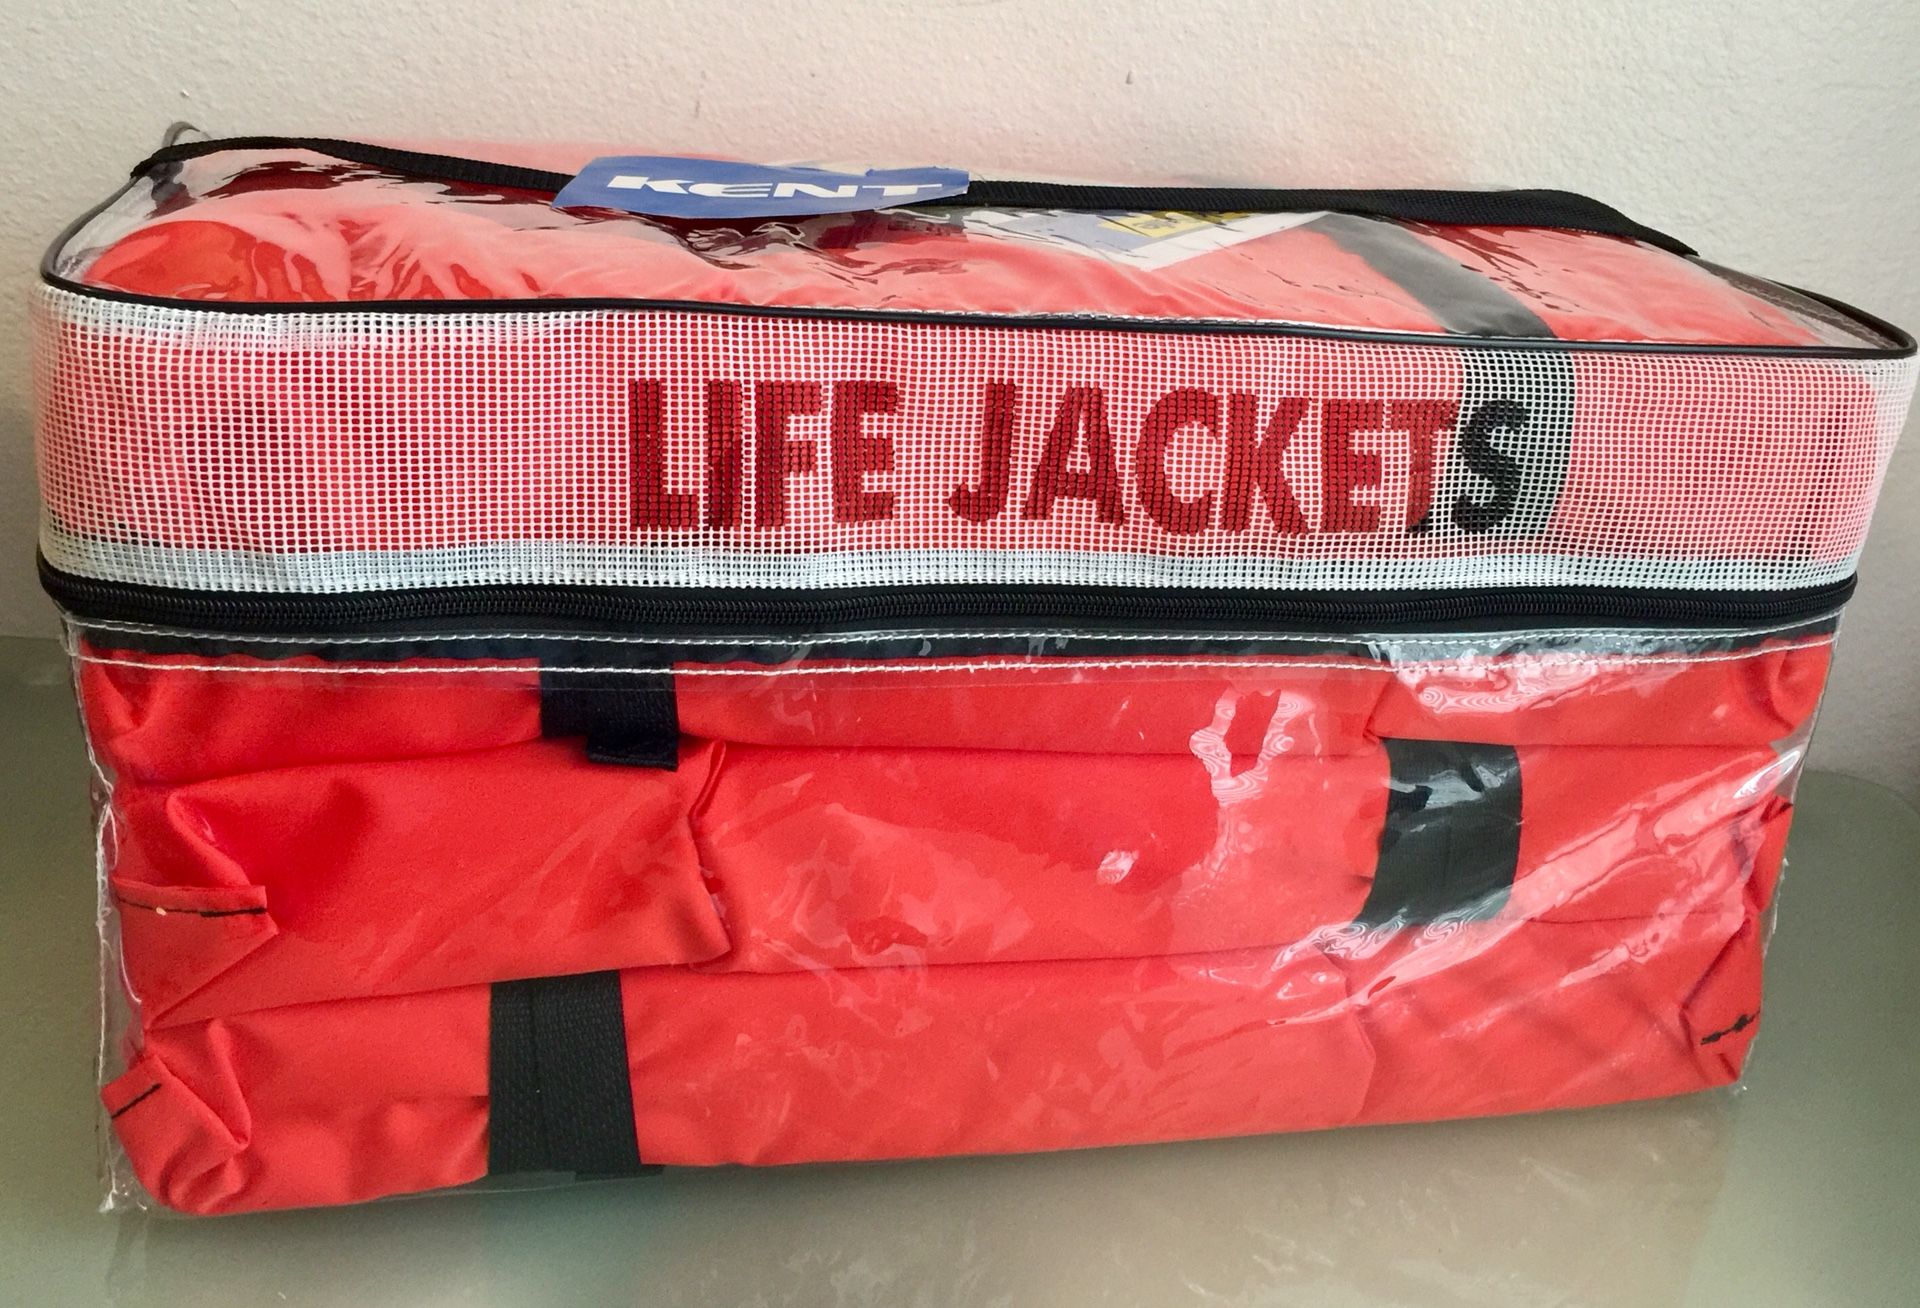 Kent Adult Life Jackets 4 Pack with Clear Storage Bag 90 lbs. and over